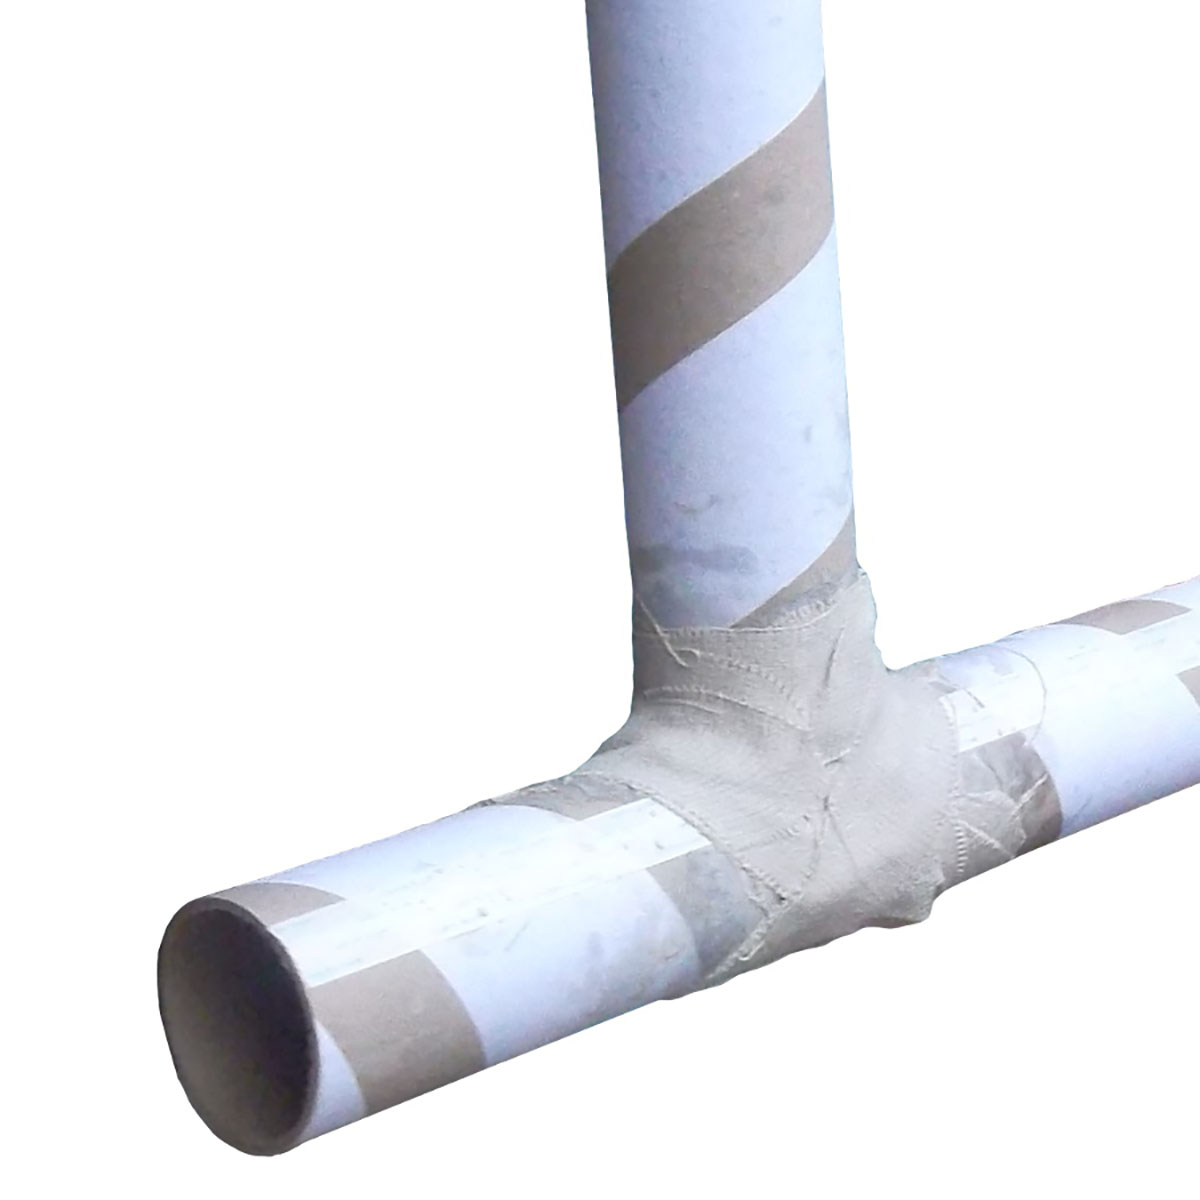 Rewettable Fibreglass Cloth Applied to Cardboard Tubes as Example